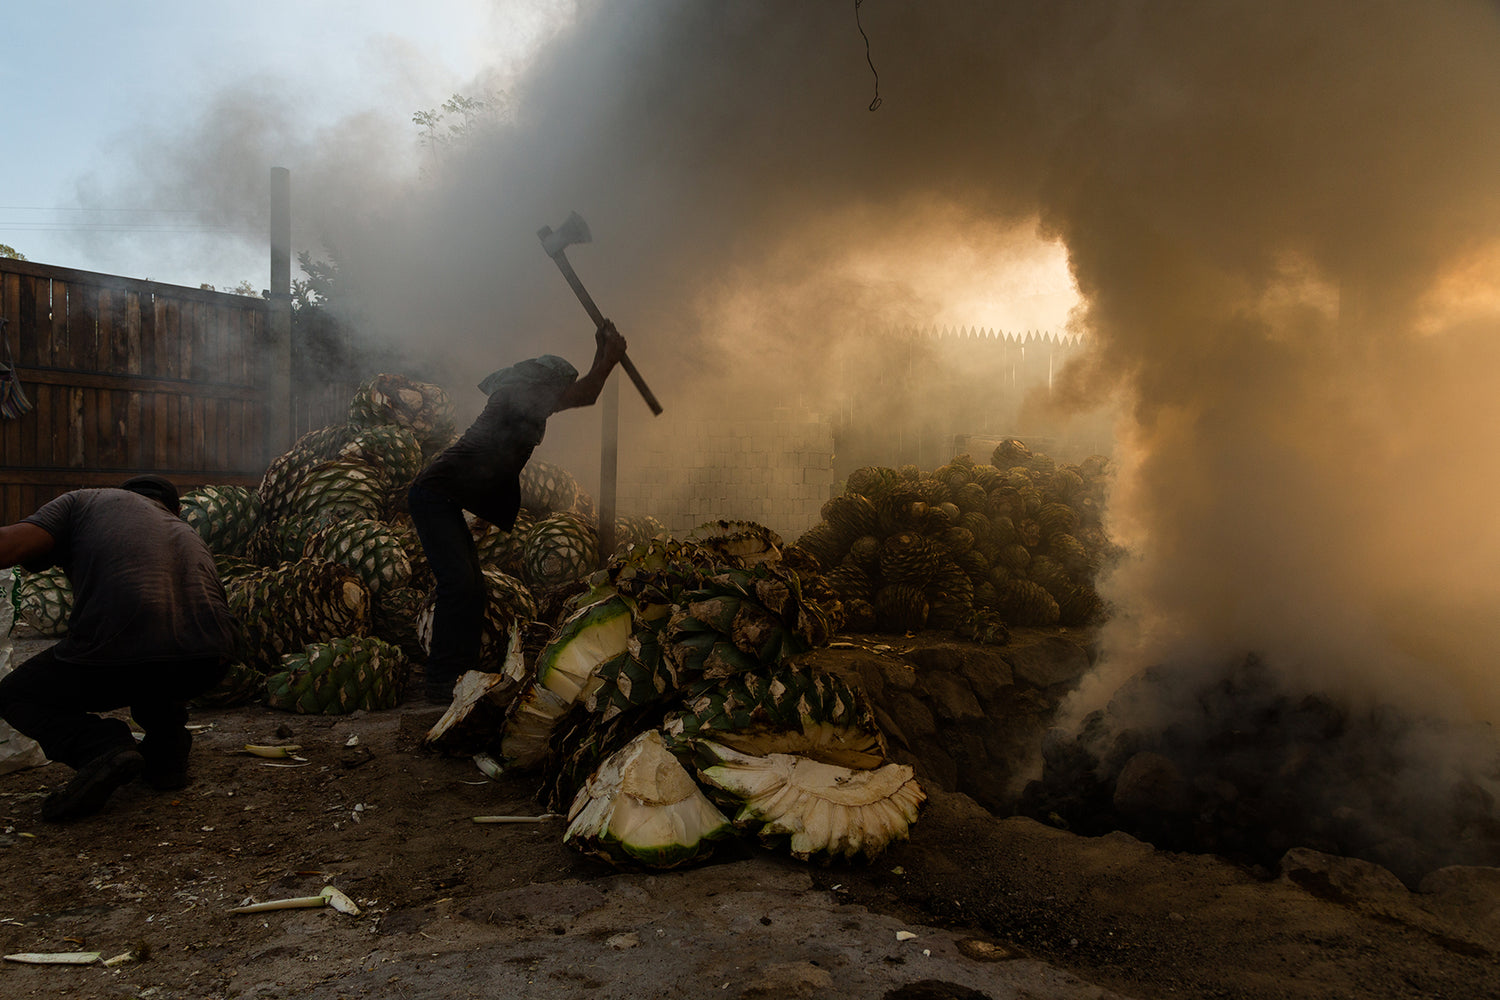 Mezcal made in the old ways. Chopping the piñas before the roast. Artisanal production in Oaxaca Mexico.